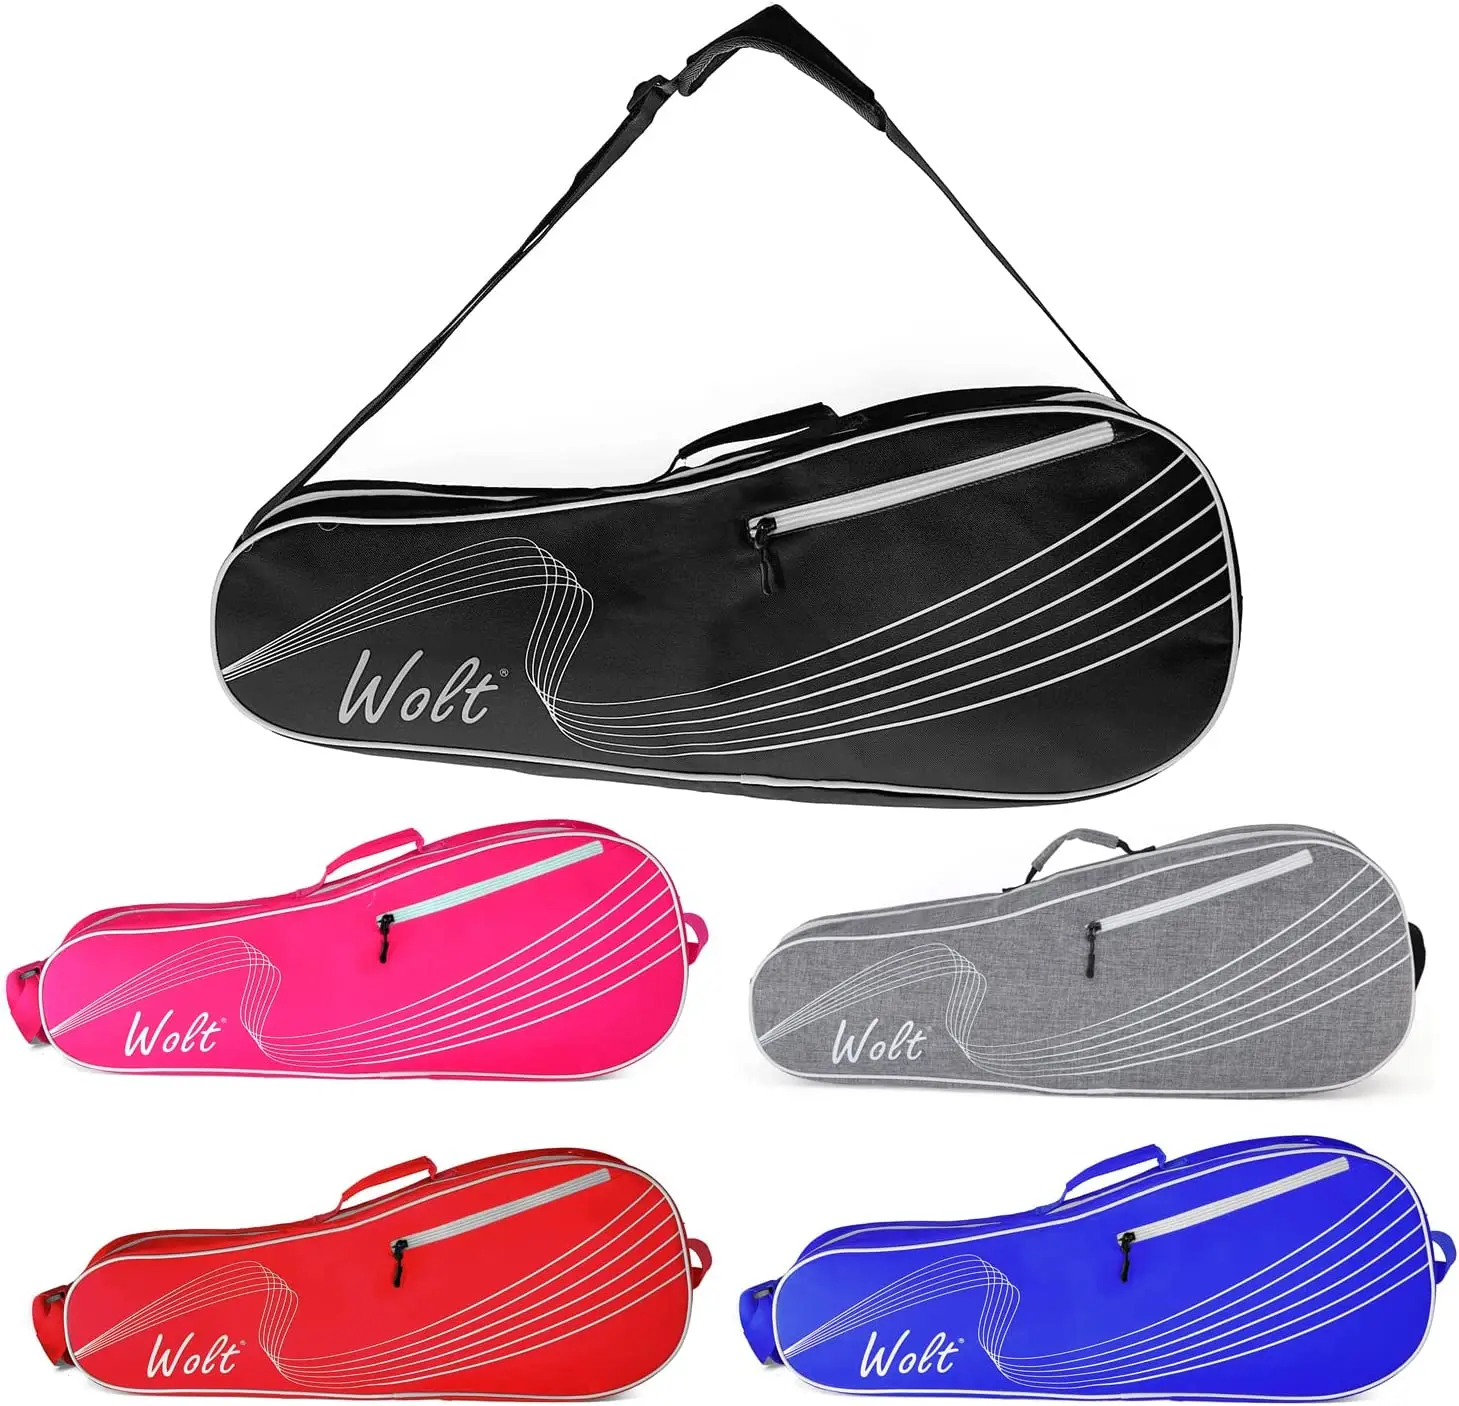 

Wolt | 3 Racquet Tennis Bag, for Professional or Beginner Tennis Players, Rackets Cover Bag with Protective Pad & Lightweight |